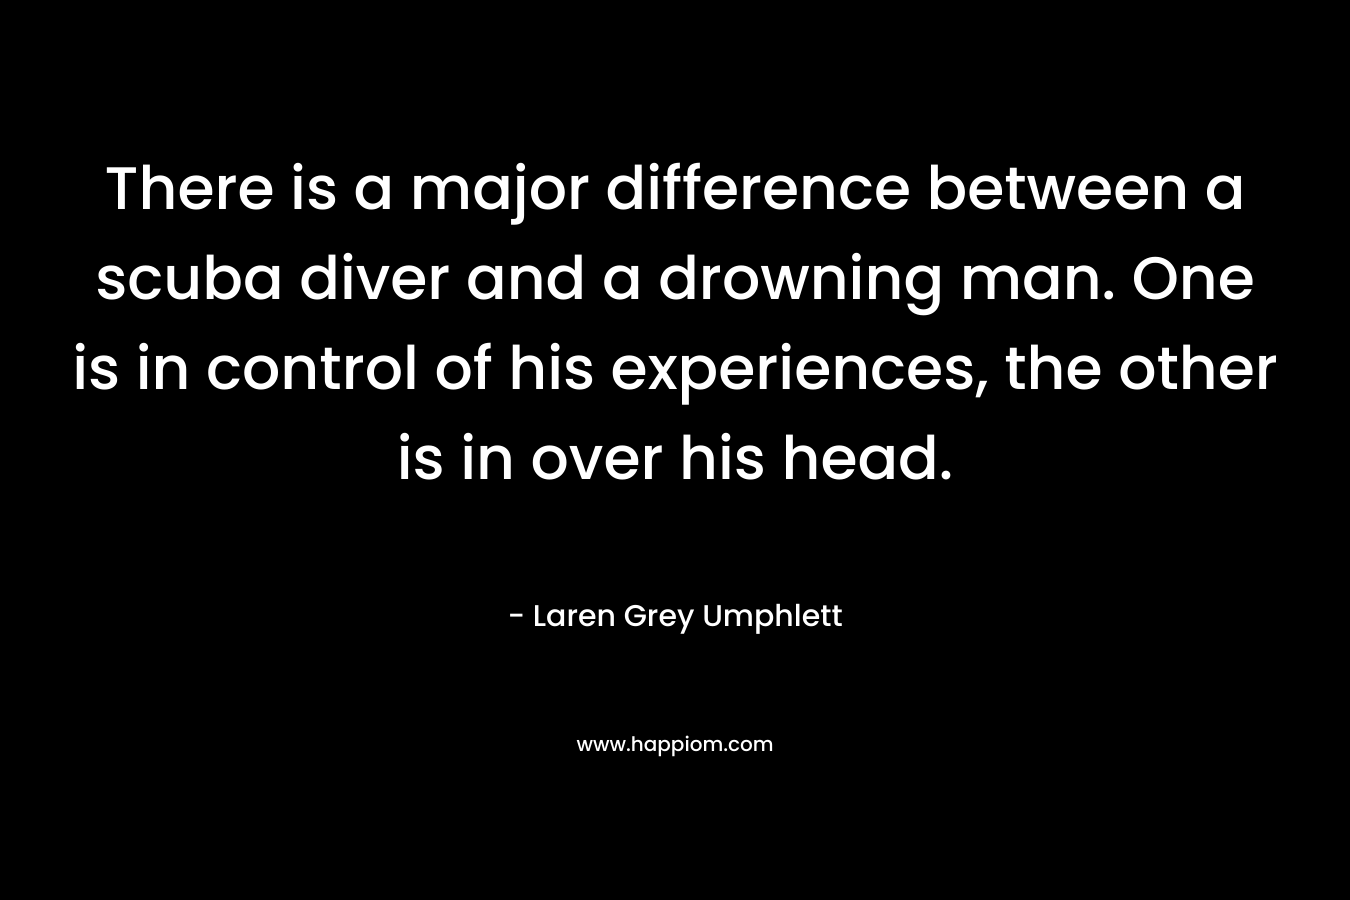 There is a major difference between a scuba diver and a drowning man. One is in control of his experiences, the other is in over his head. – Laren Grey Umphlett